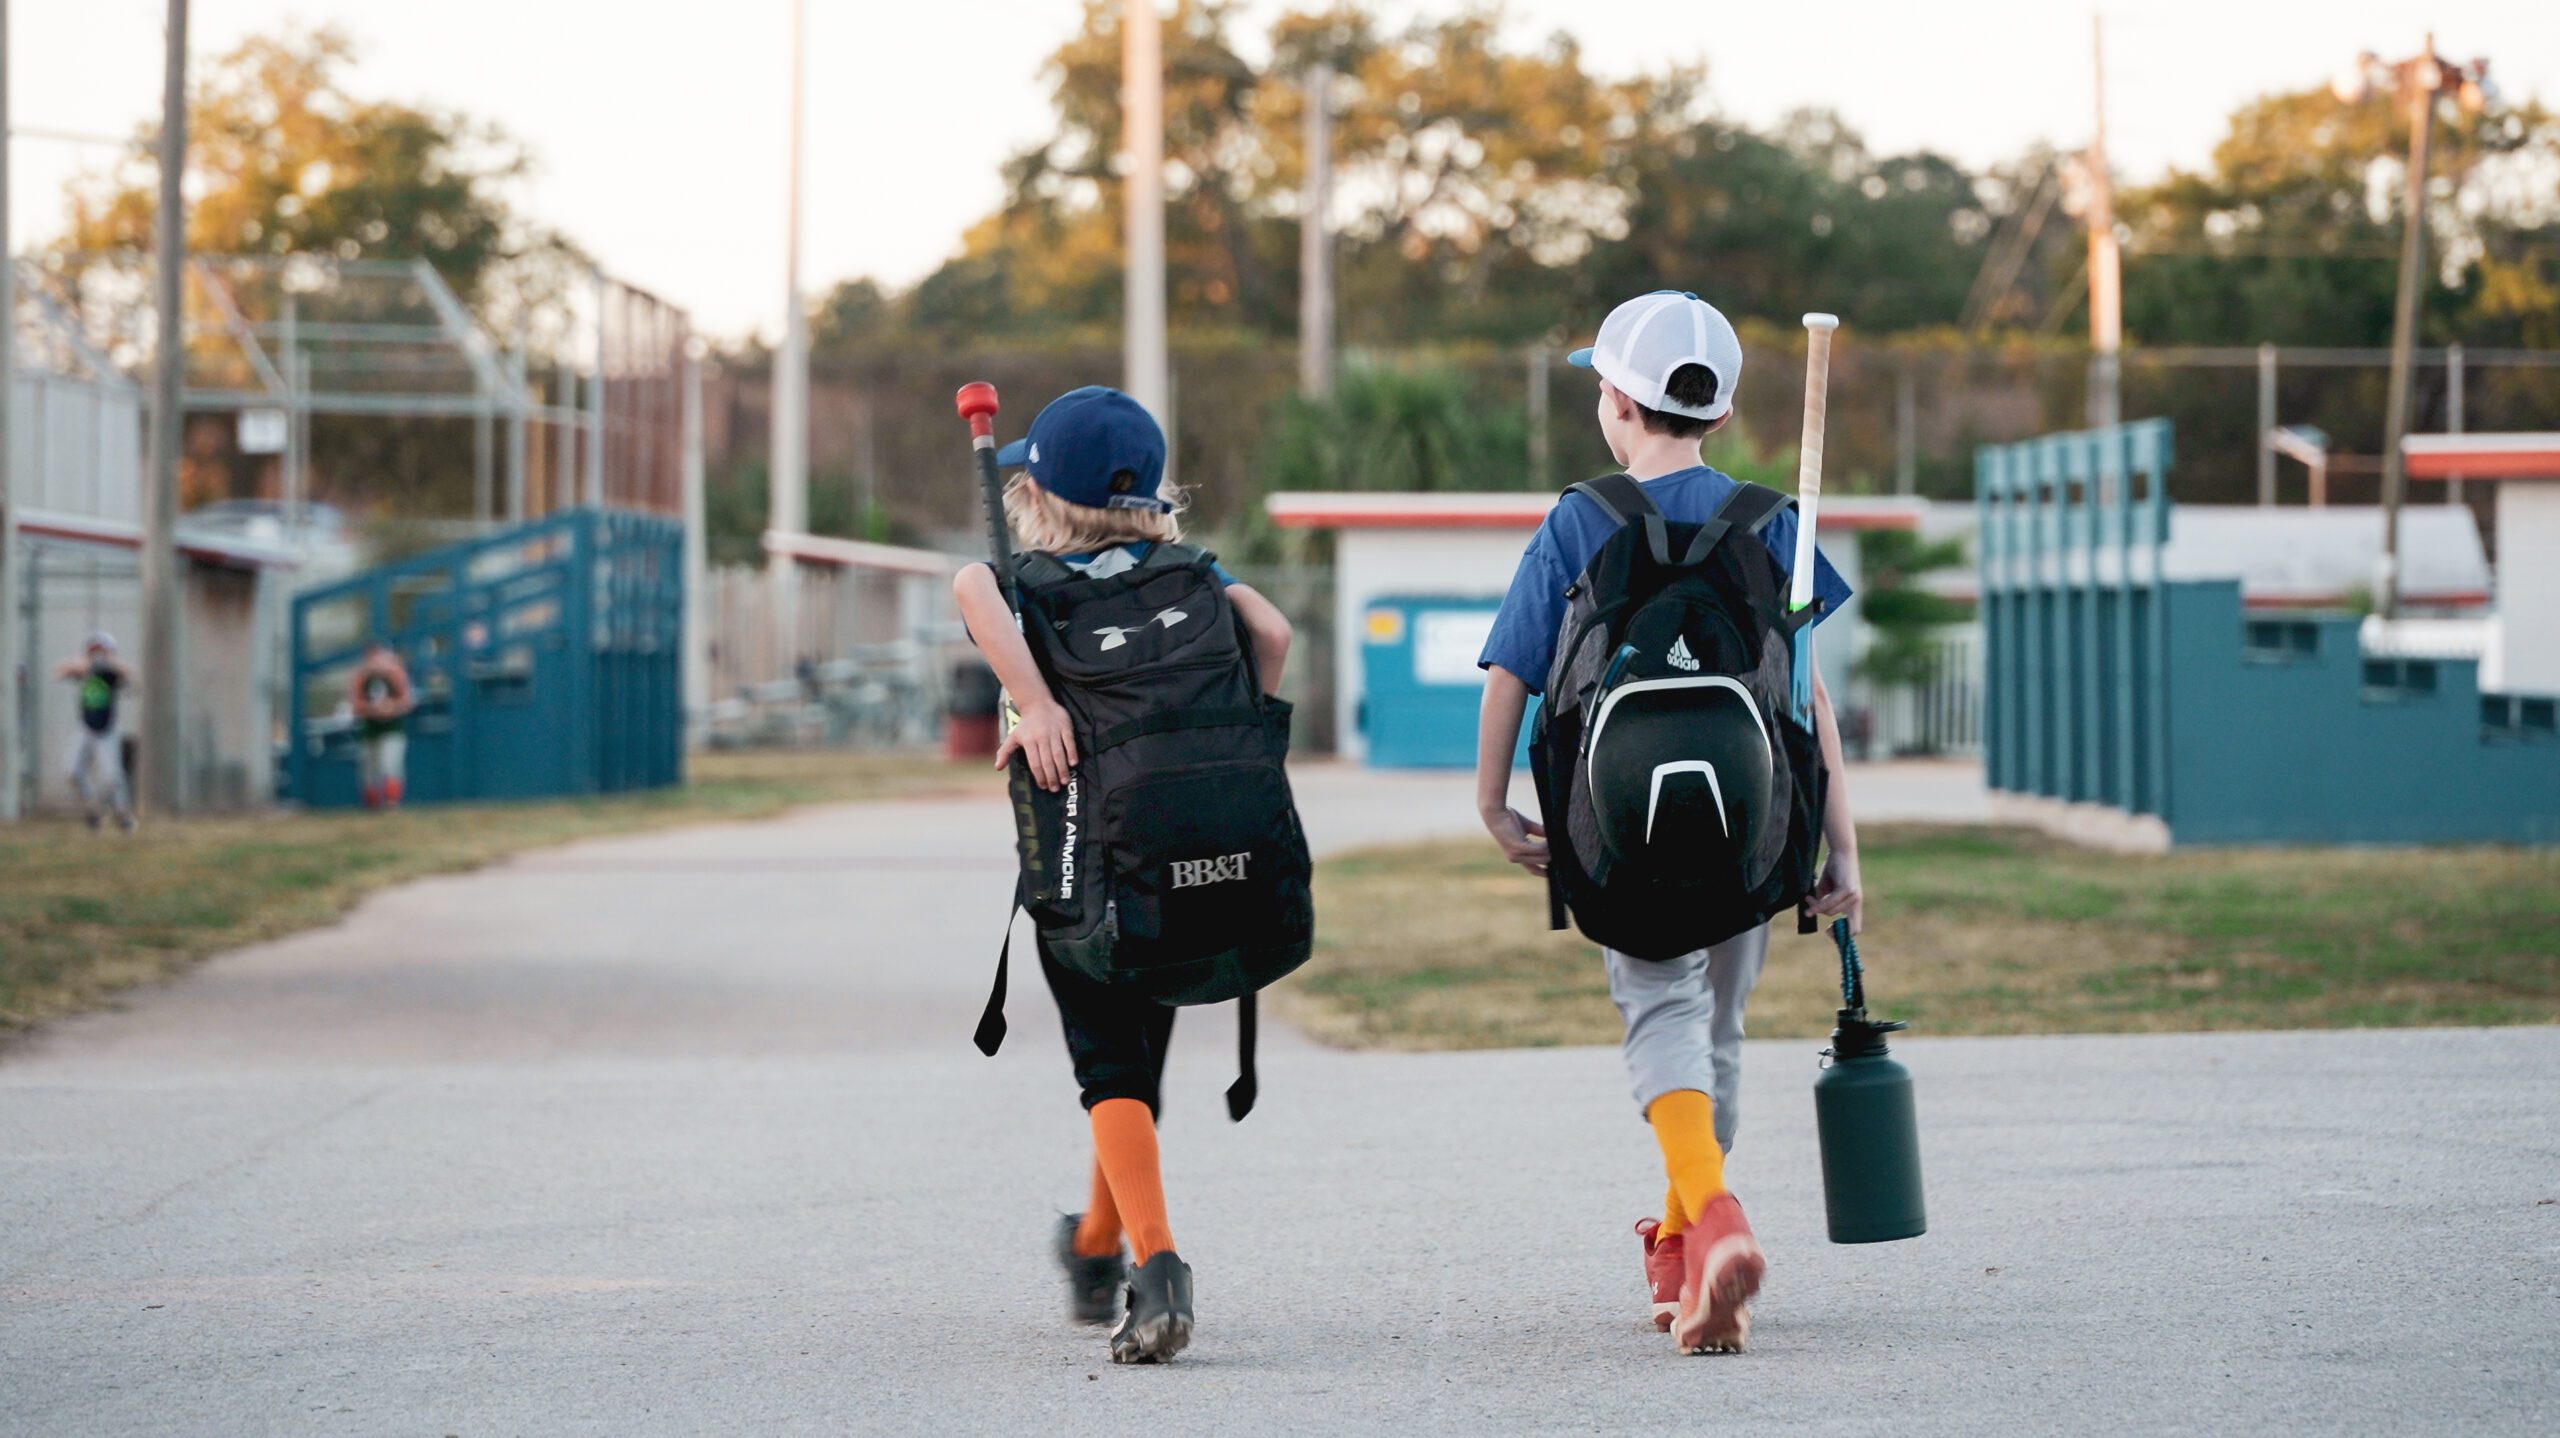 Two young baseball players walking away from the camera toward the field.